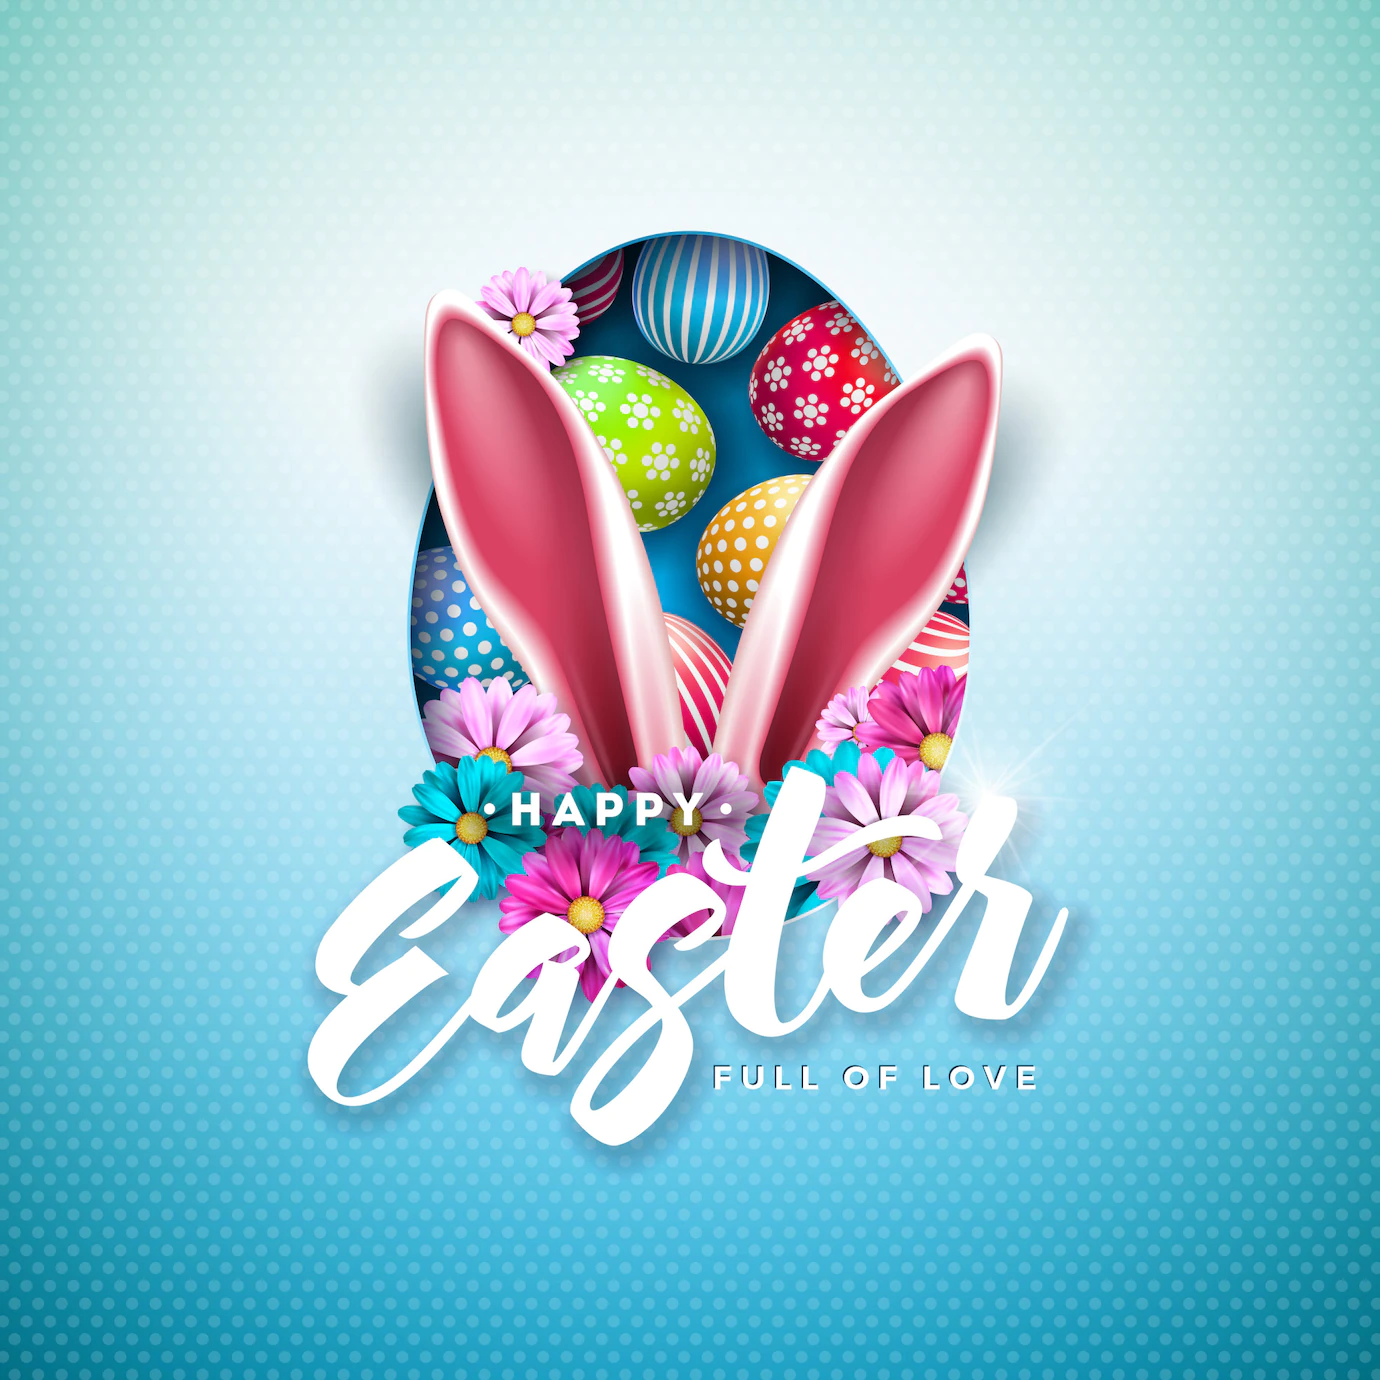 Happy Easter Illustration With Colorful Painted Egg Rabbit Ears 1314 2663